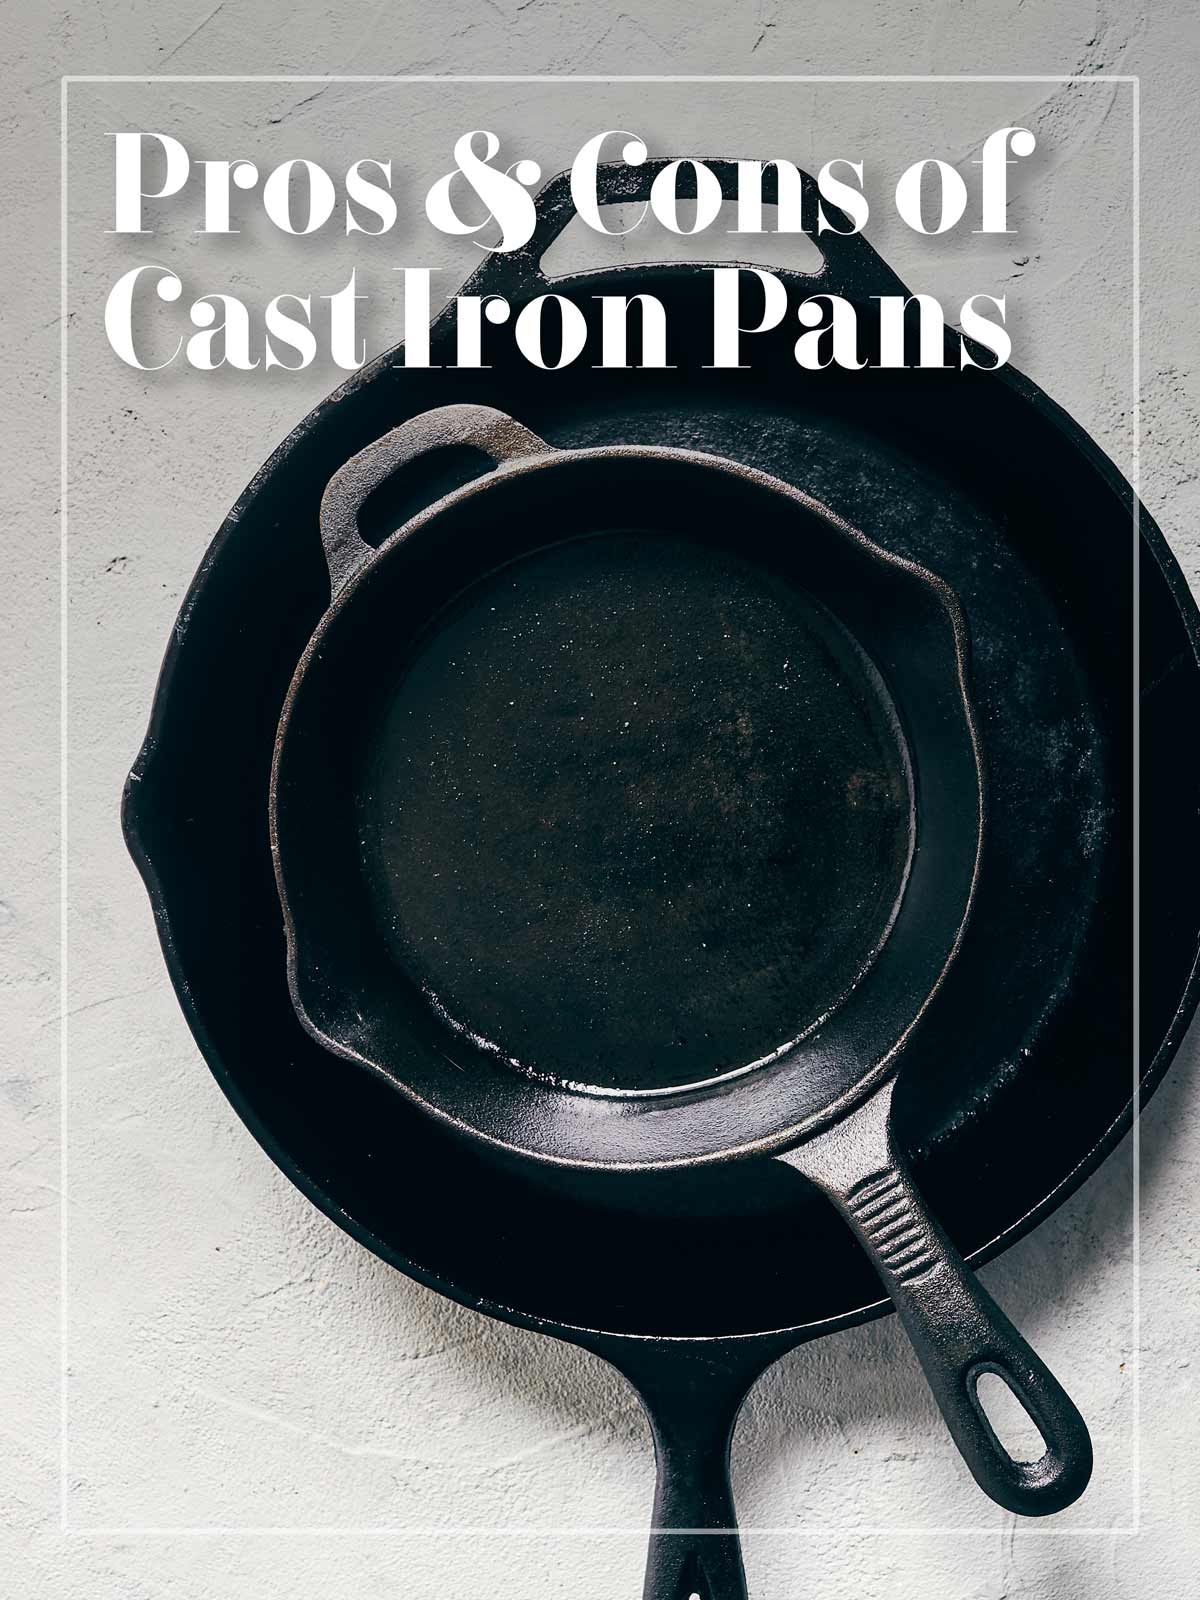 https://evergreenkitchen.ca/wp-content/uploads/2021/12/Pros-and-cons-of-cast-iron-pans-cover-evergreen-kitchen.jpg